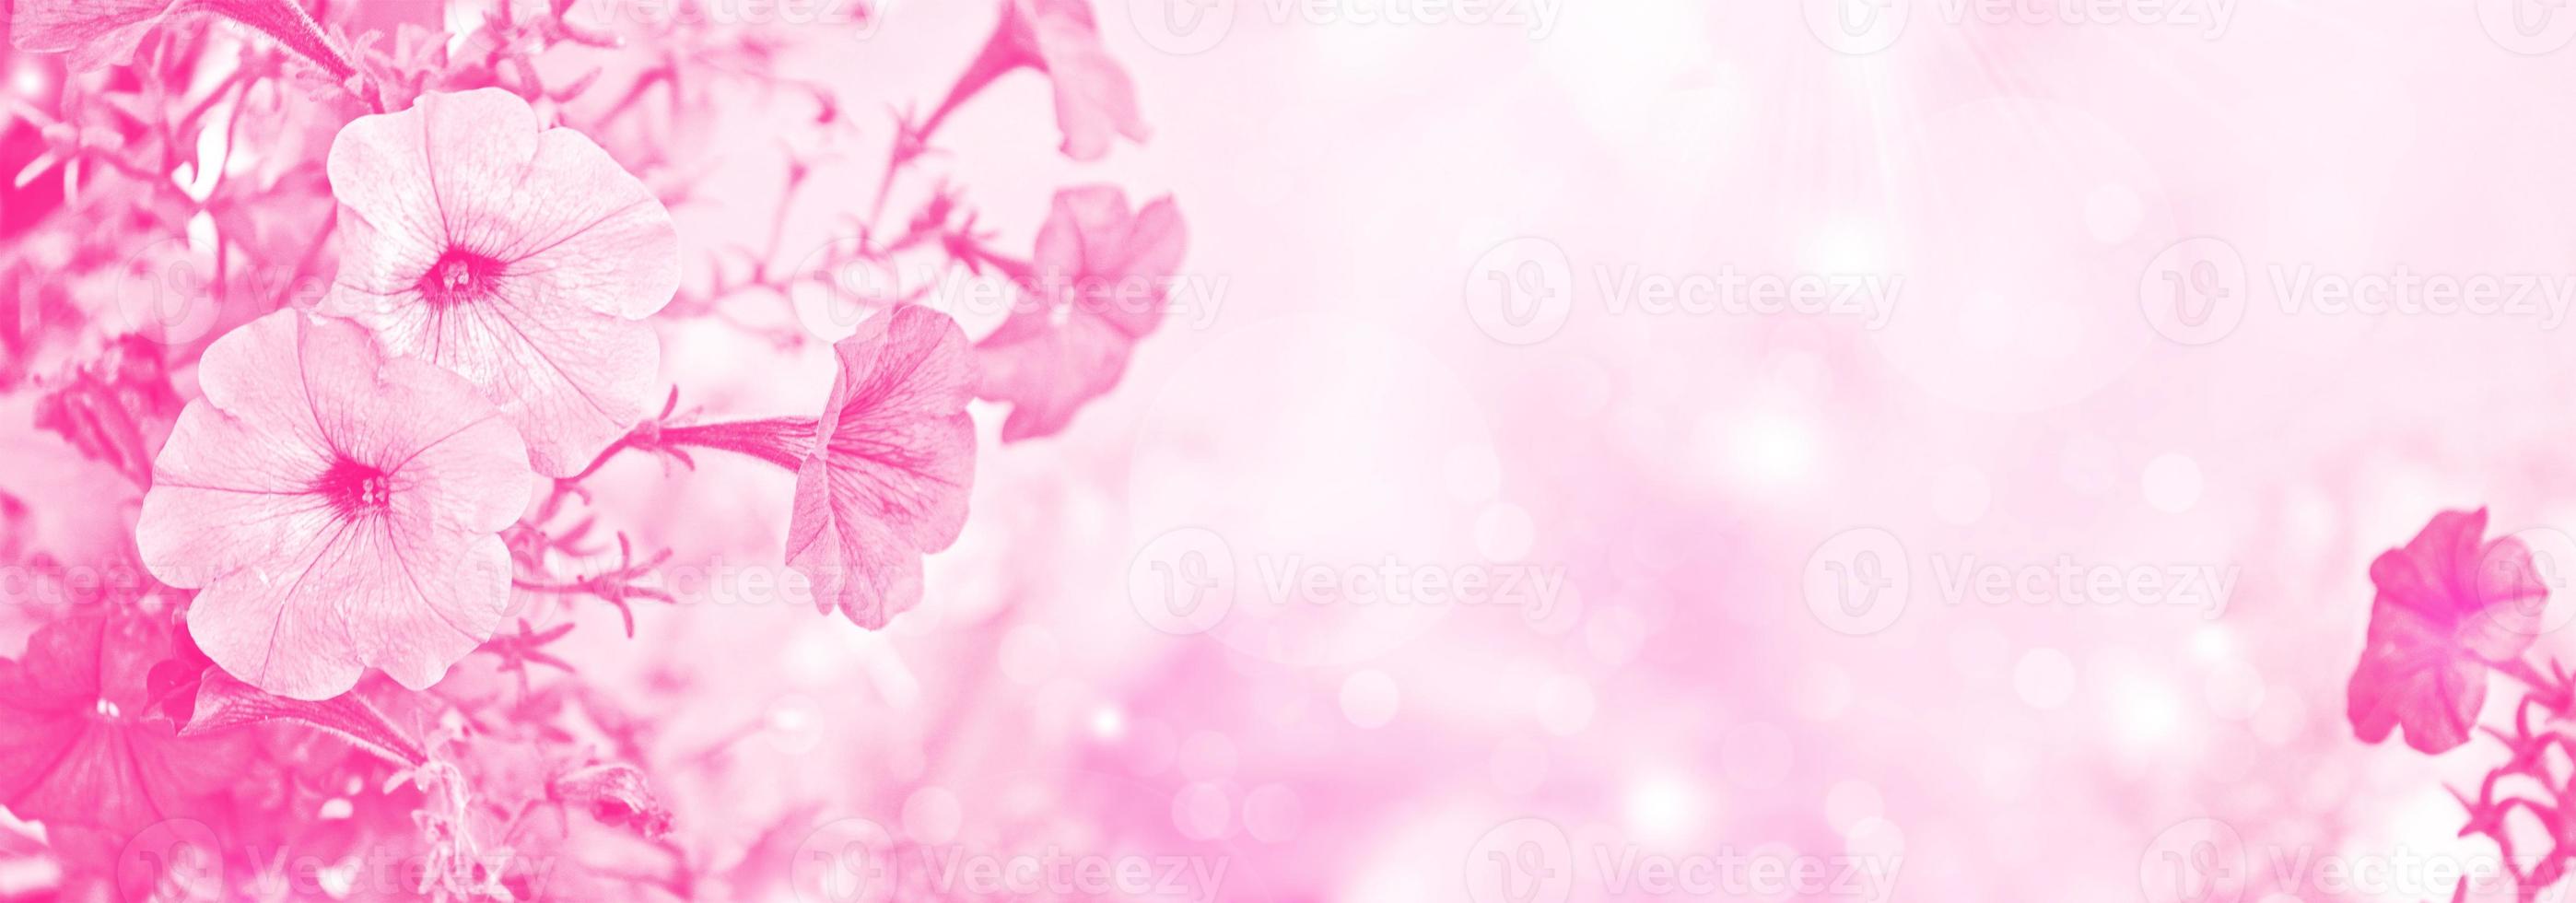 Closeup of a petunias on a flowerbed, pink flowers, floral background. photo